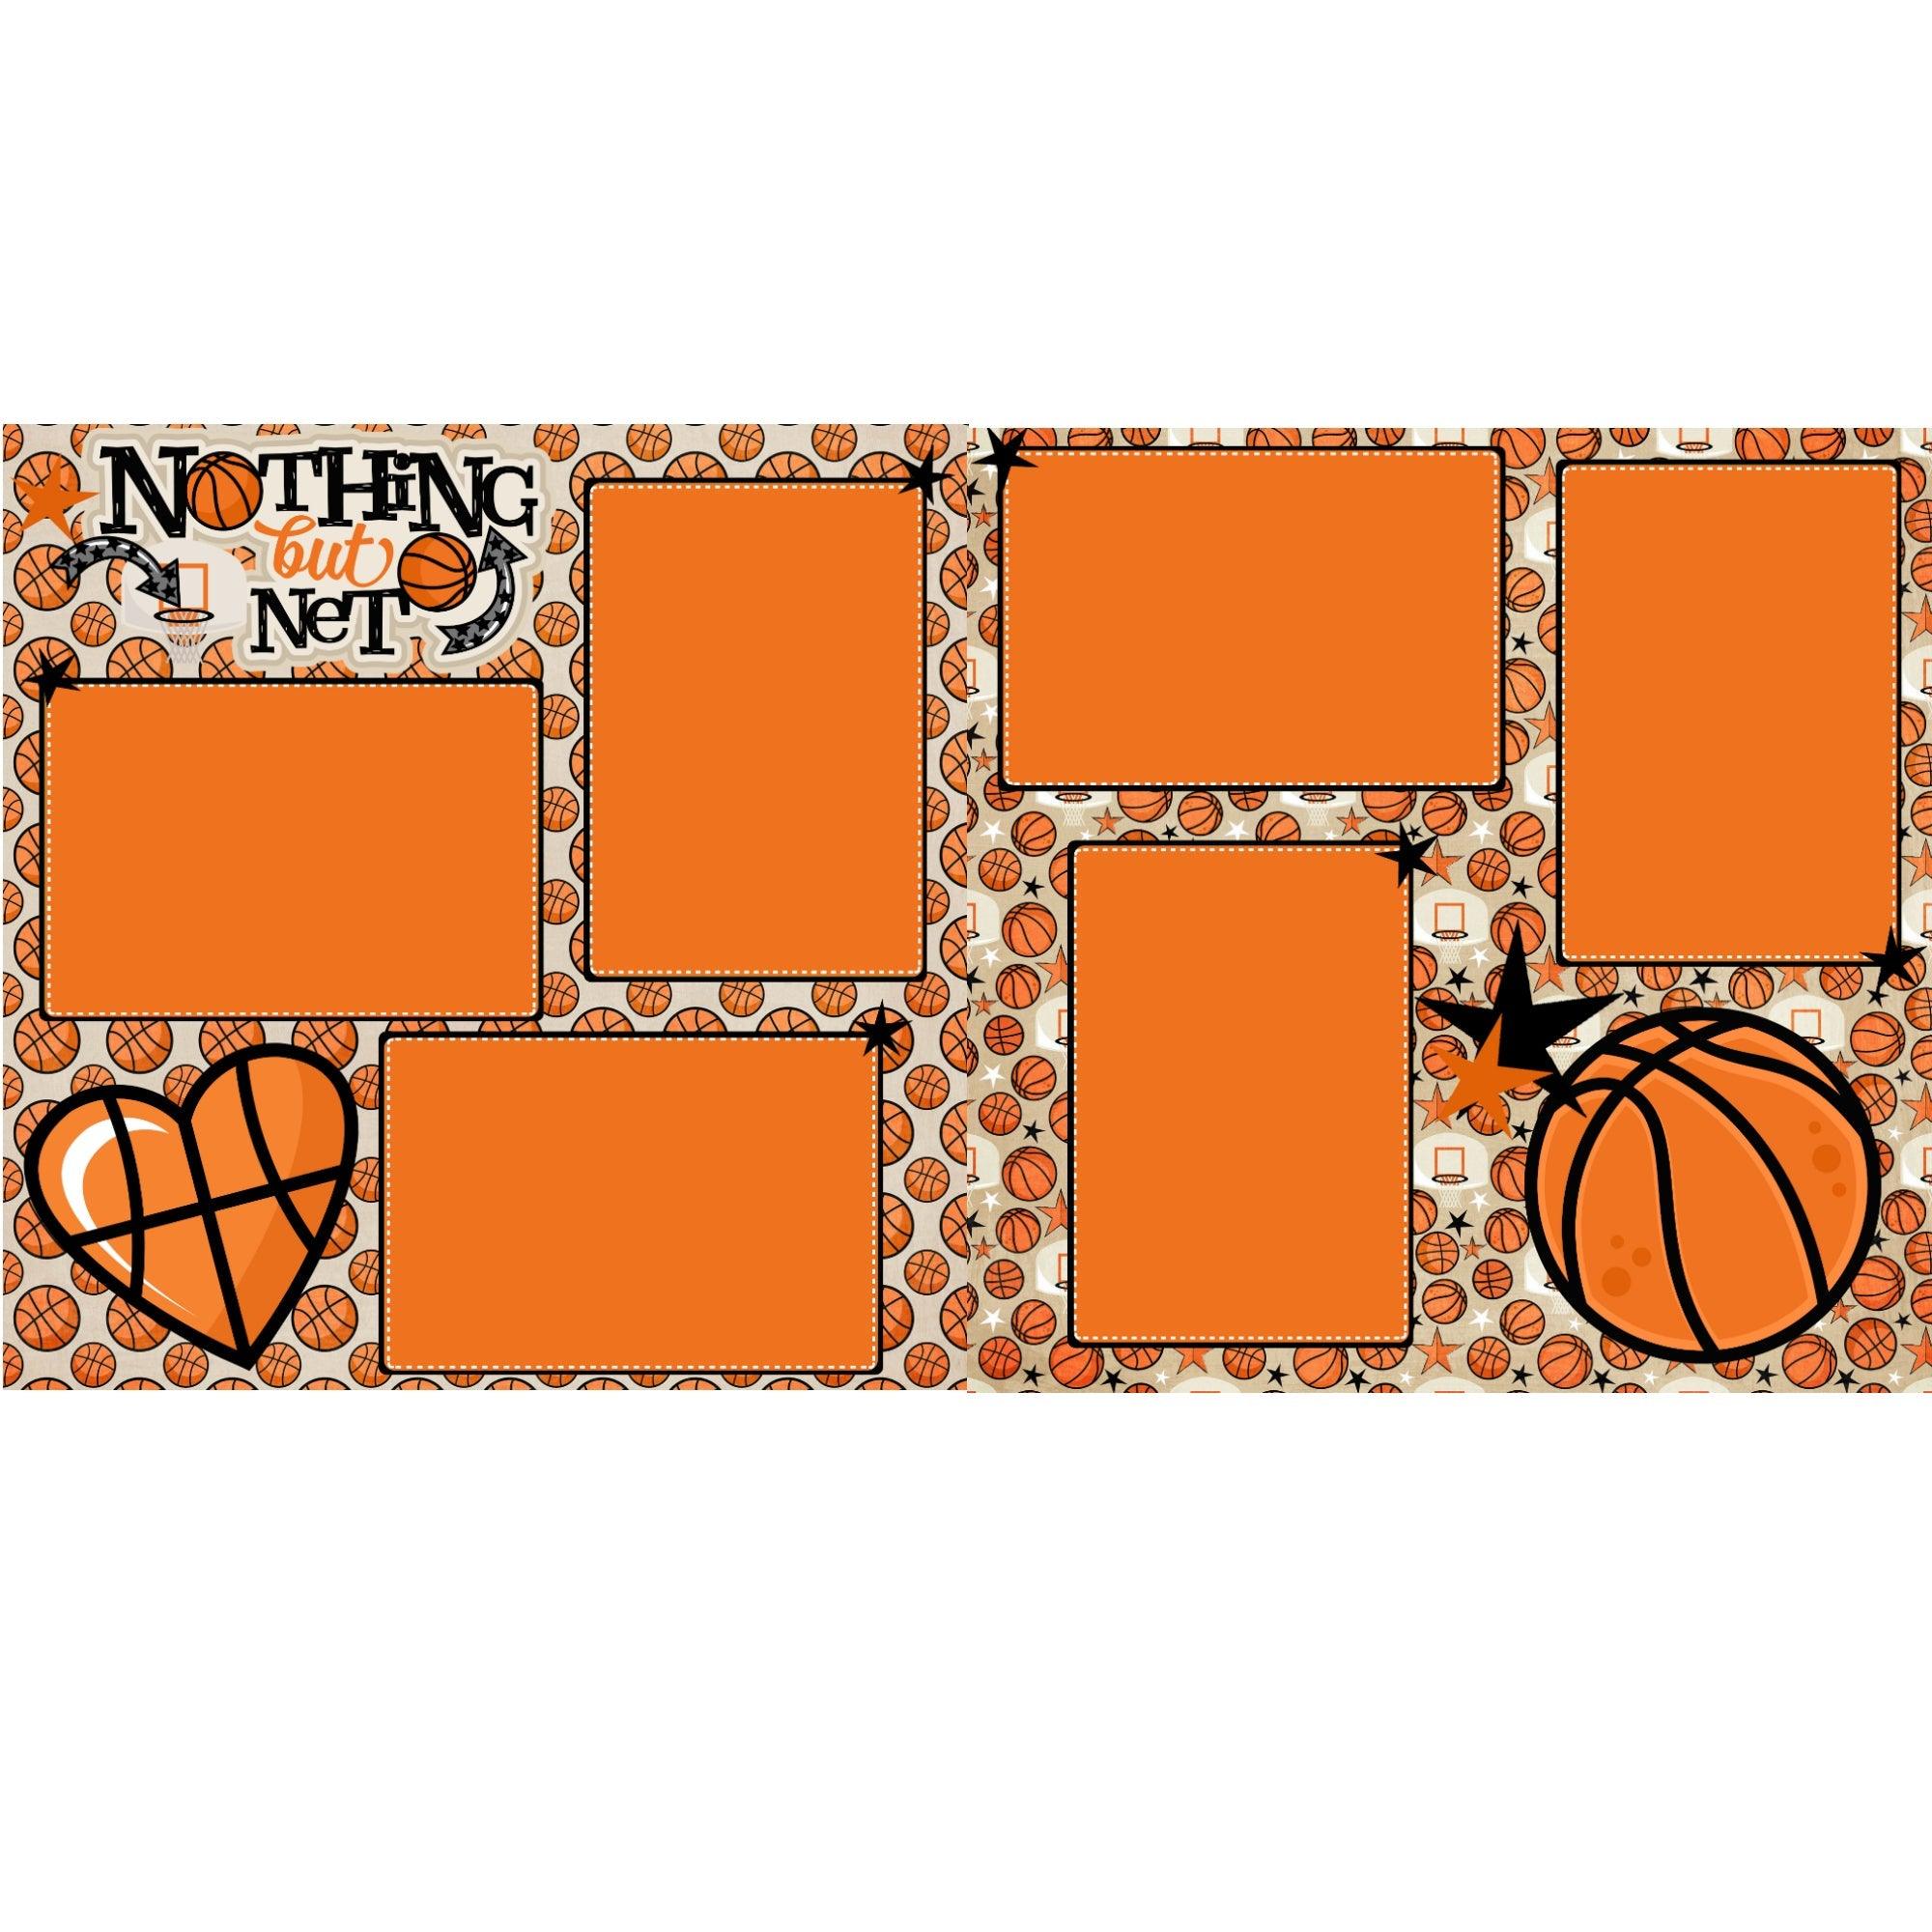 Basketball Nothin' But Net (2) - 12 x 12 Premade, Printed Scrapbook Pages by SSC Designs